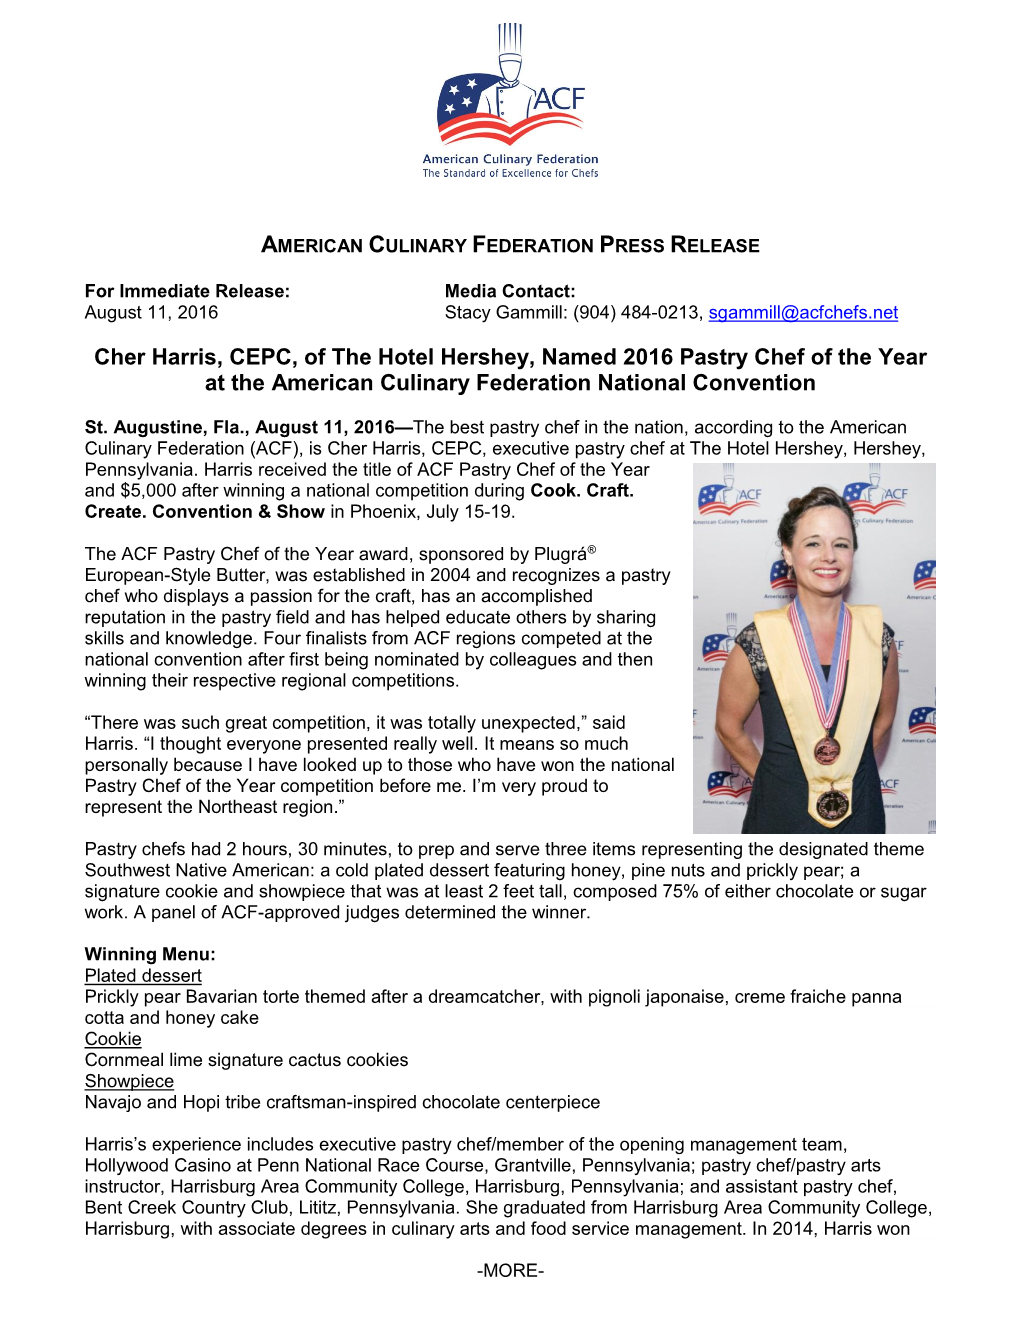 Cher Harris, CEPC, of the Hotel Hershey, Named 2016 Pastry Chef of the Year at the American Culinary Federation National Convention